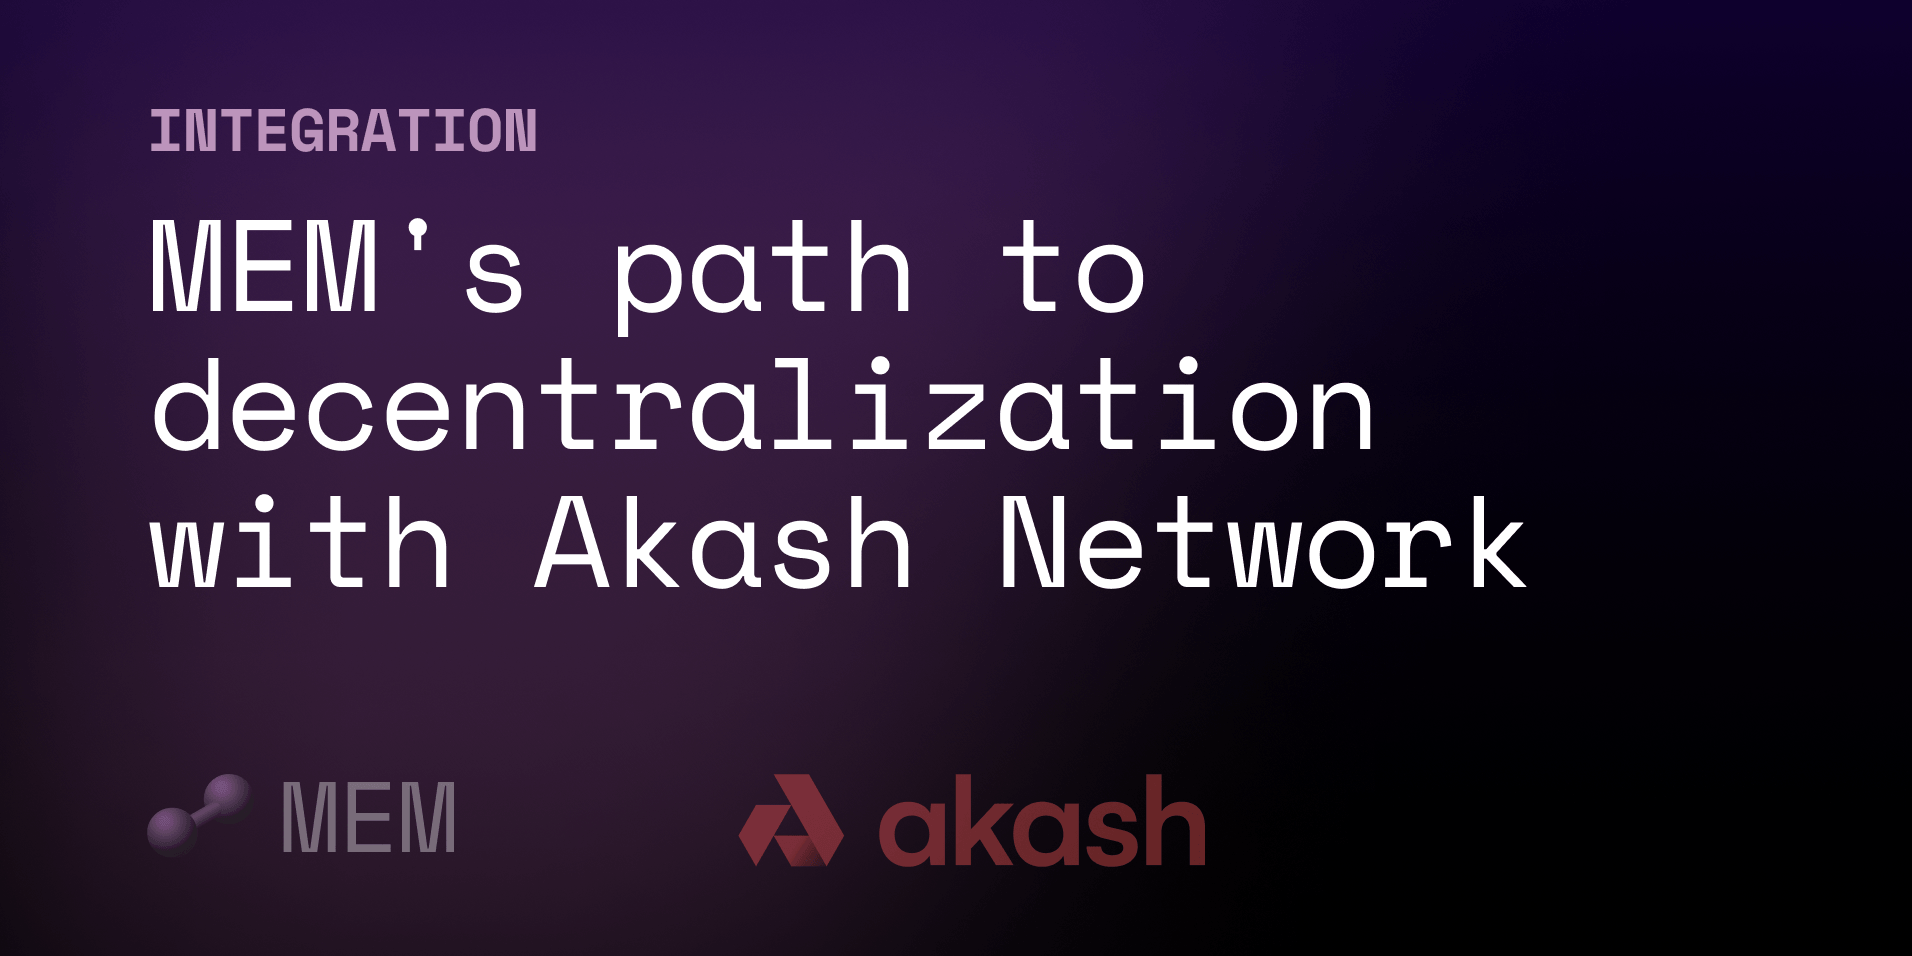 MEM's path to decentralization with Akash Network